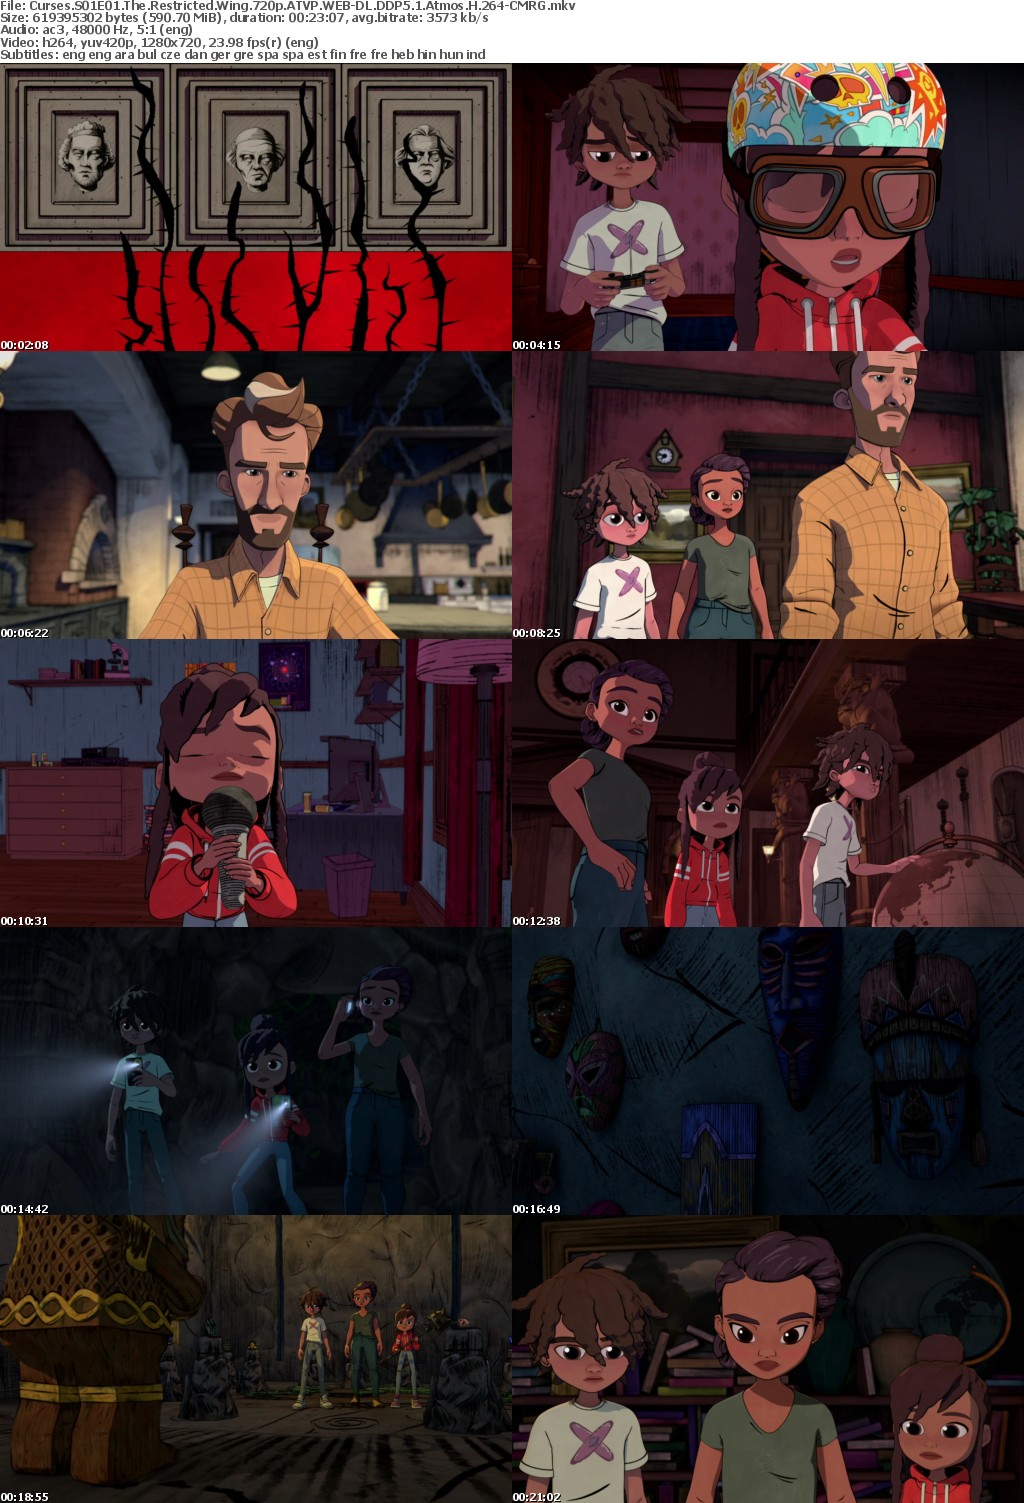 Curses S01E01 The Restricted Wing 720p ATVP WEB-DL DDP5 1 Atmos H 264-CMRG